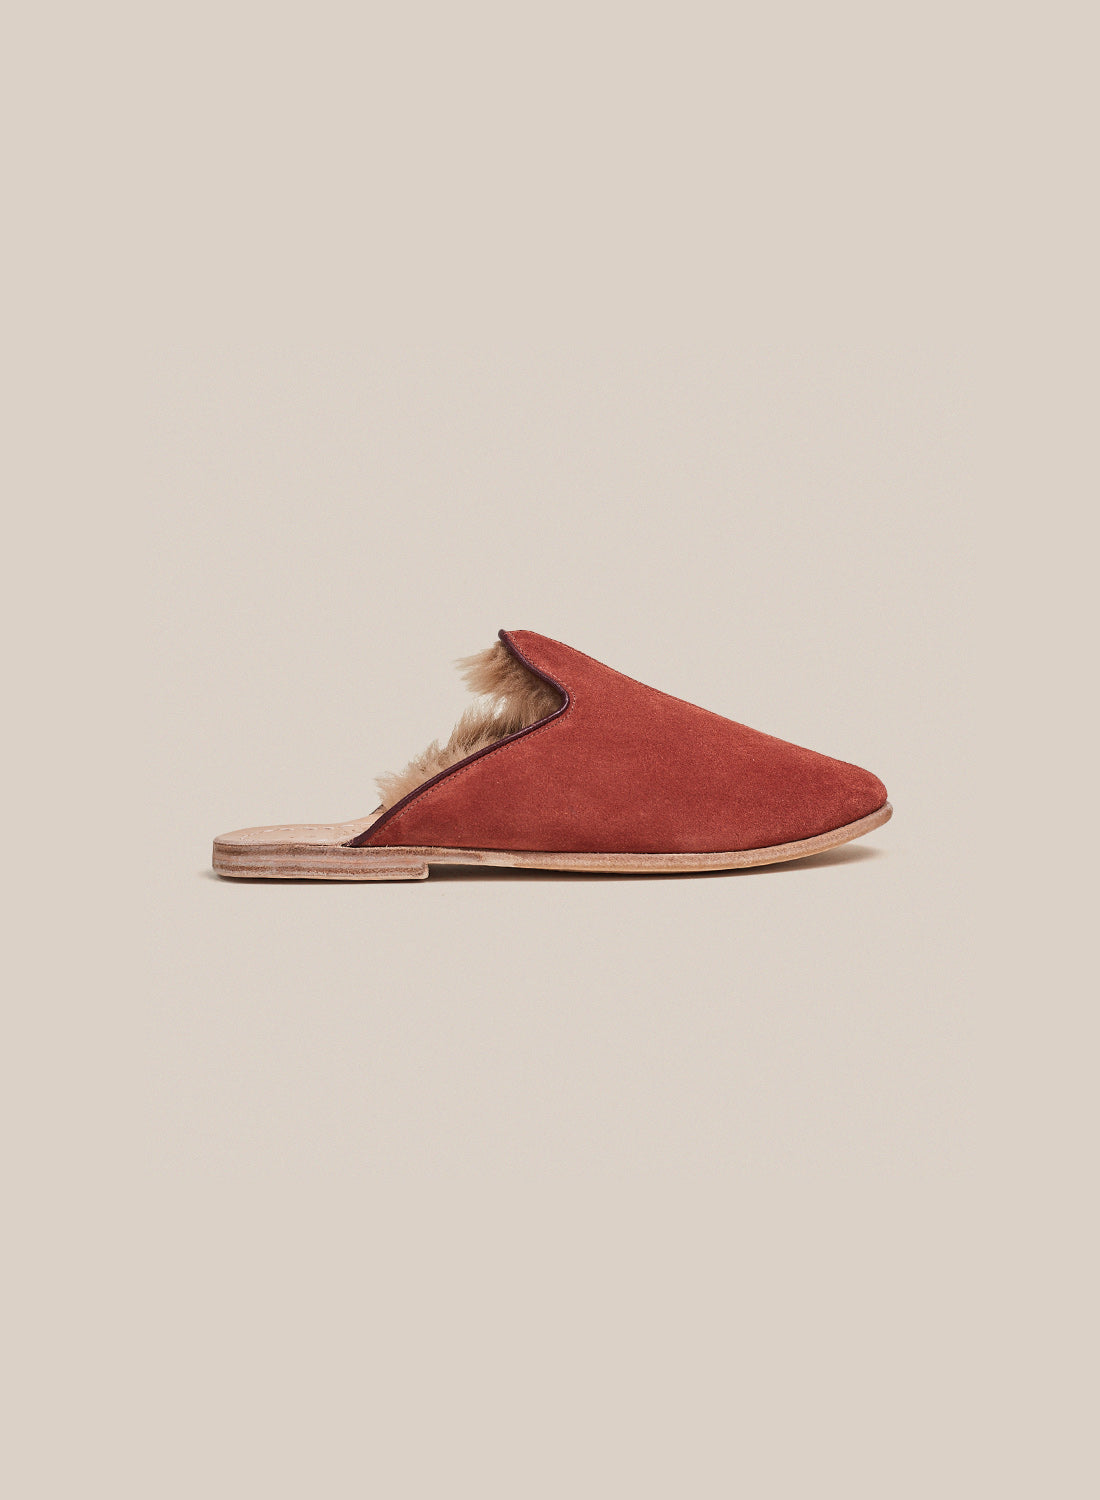 Rust Suede Shearling Baba (Mens)